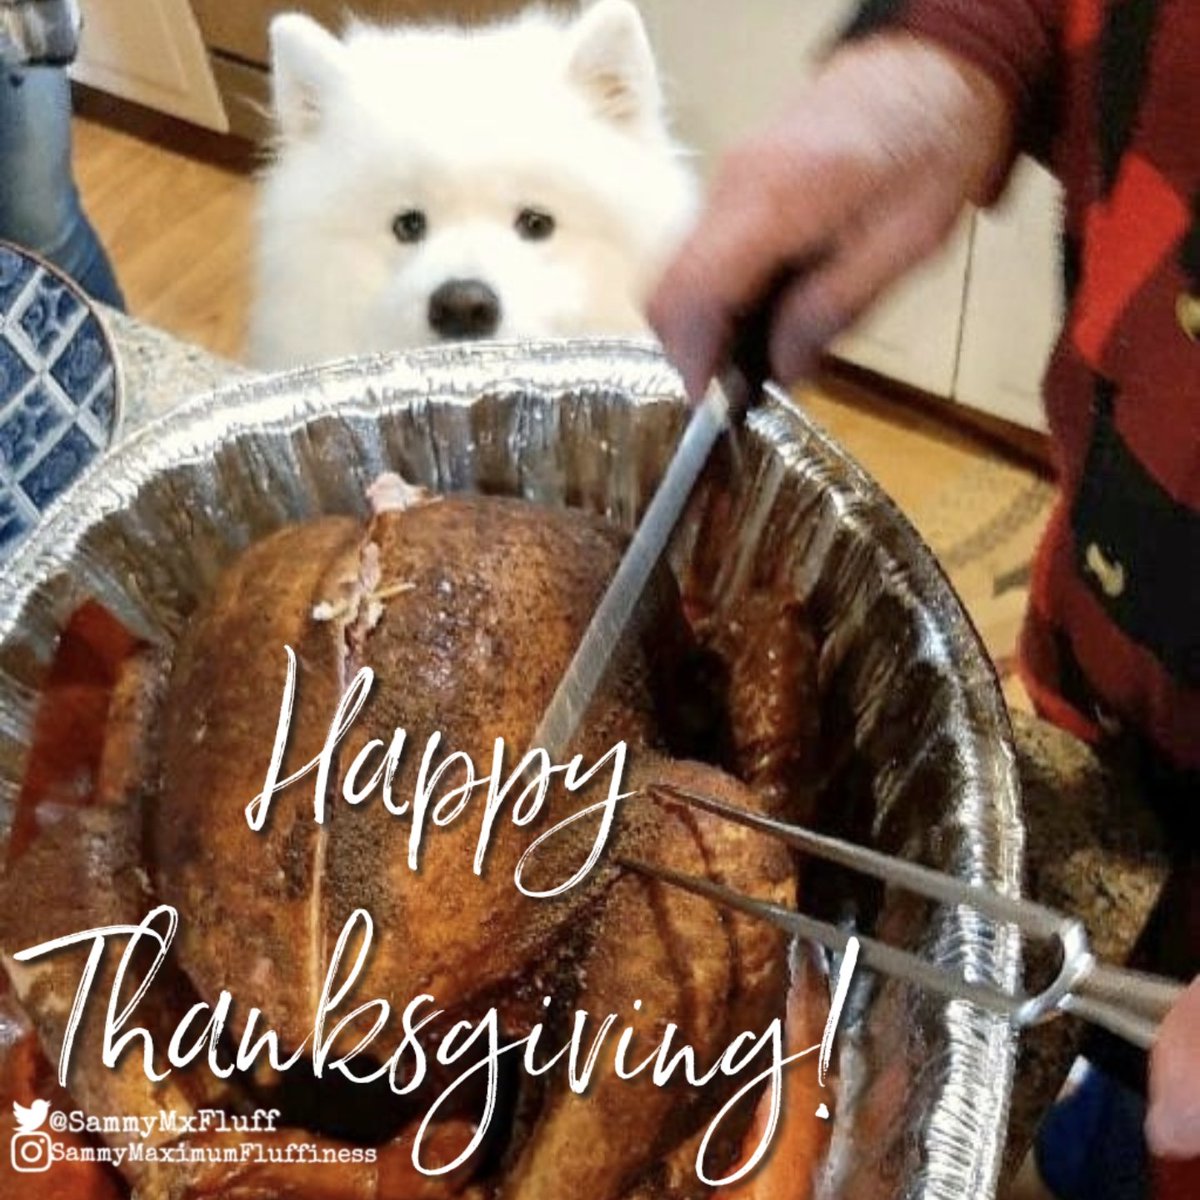 From our family to yours Happy Thanksgiving! 🦃

#happythanksgiving2022 #happyturkeyday #sothankful #turkeyday #KraftyBox #SammyMaximumFluffiness